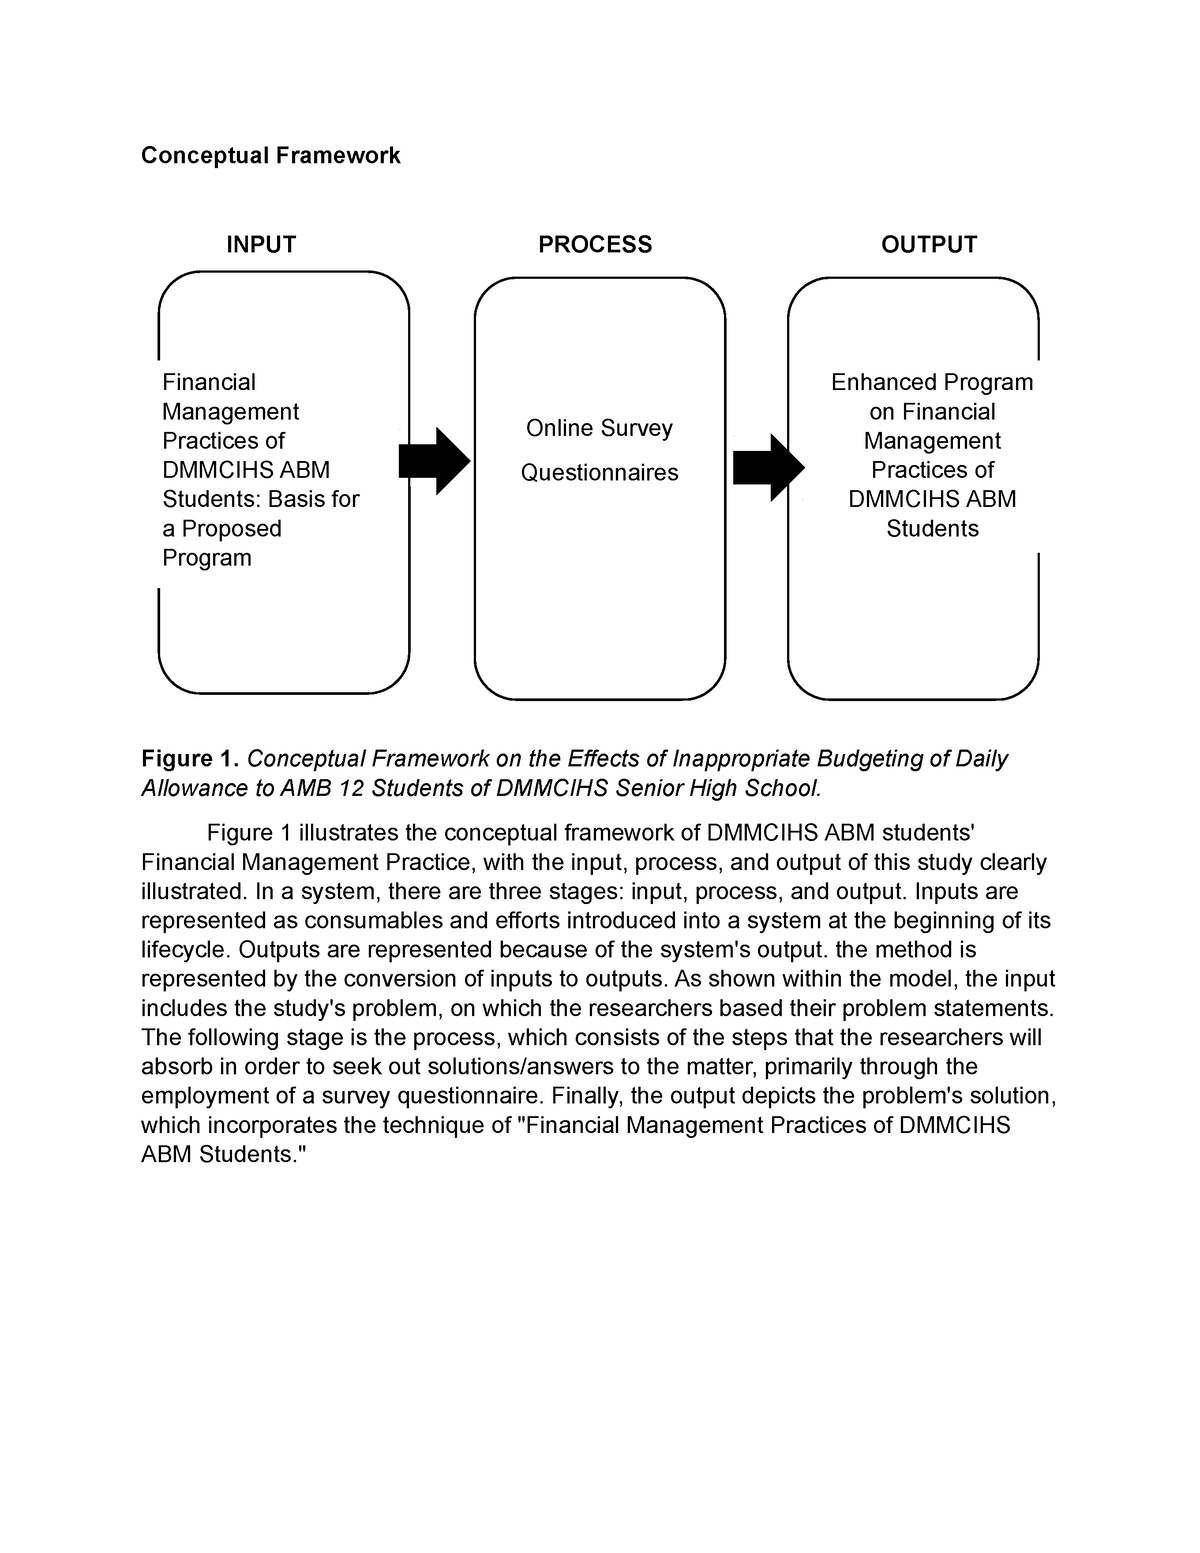 output in research conceptual framework